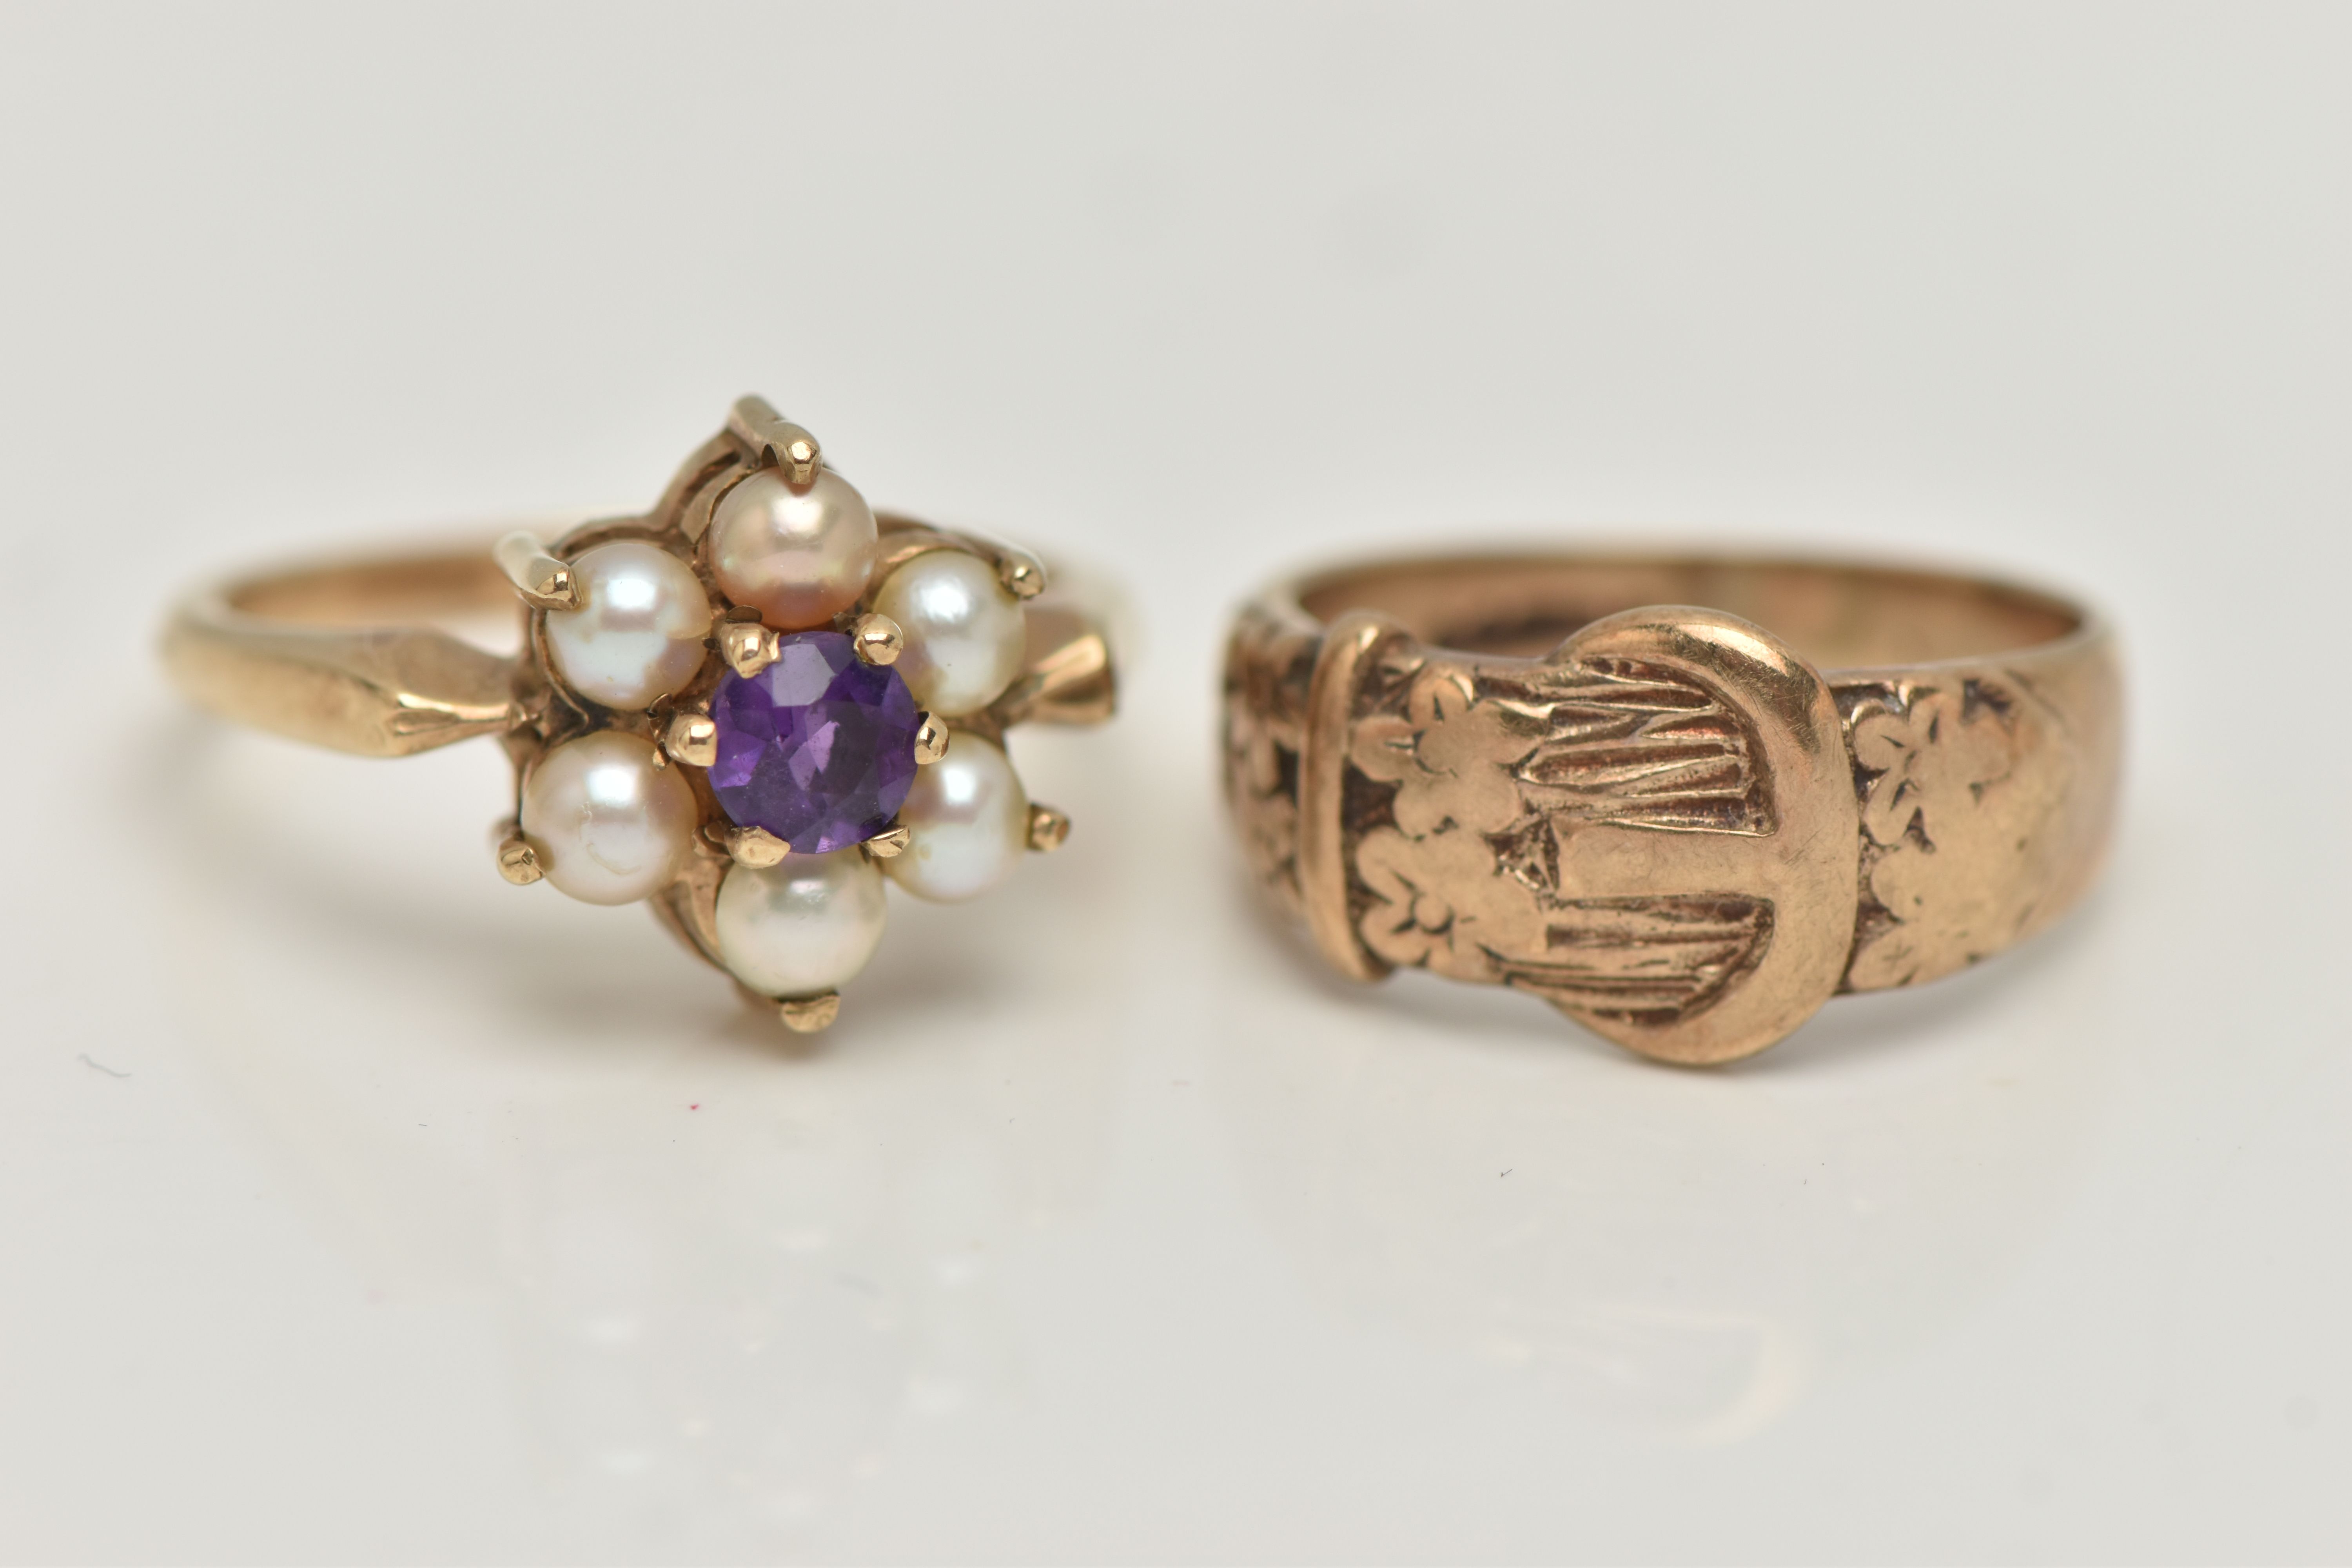 A 9CT GOLD RING AND A GEM SET RING, a 9ct gold buckle ring with floral detail, hallmarked 9ct London